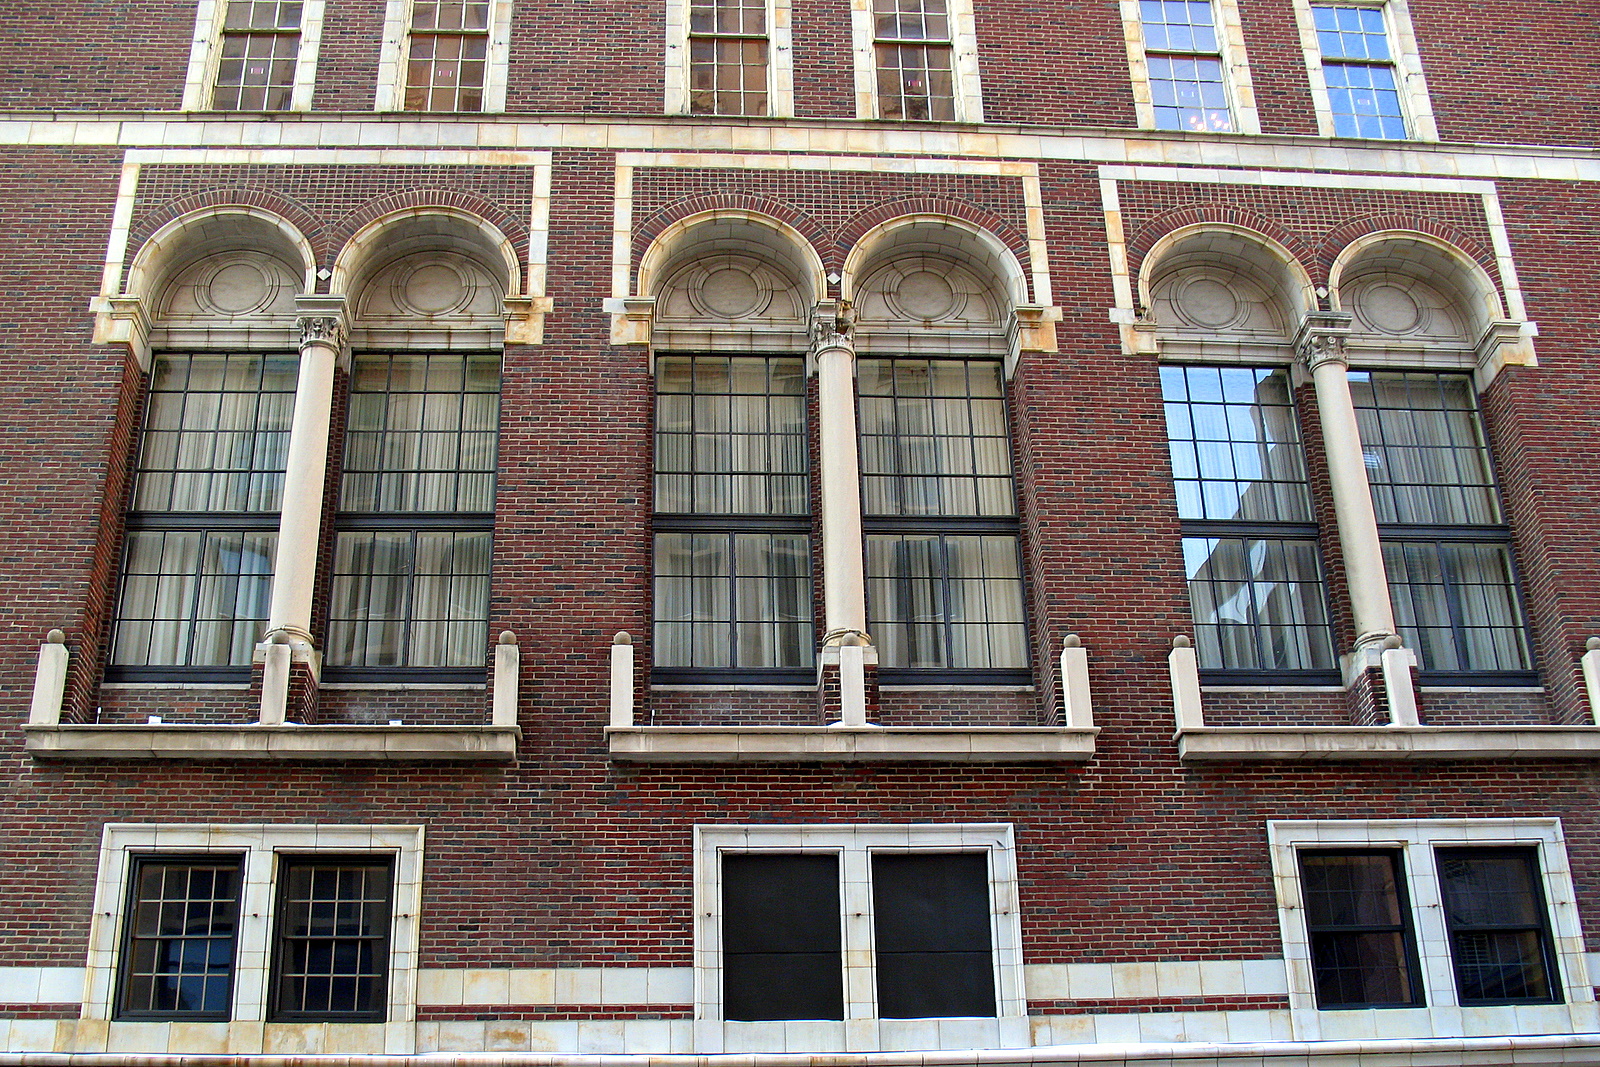 View of the windows for the Saint Paul Athletic Club building in the Twin Cities